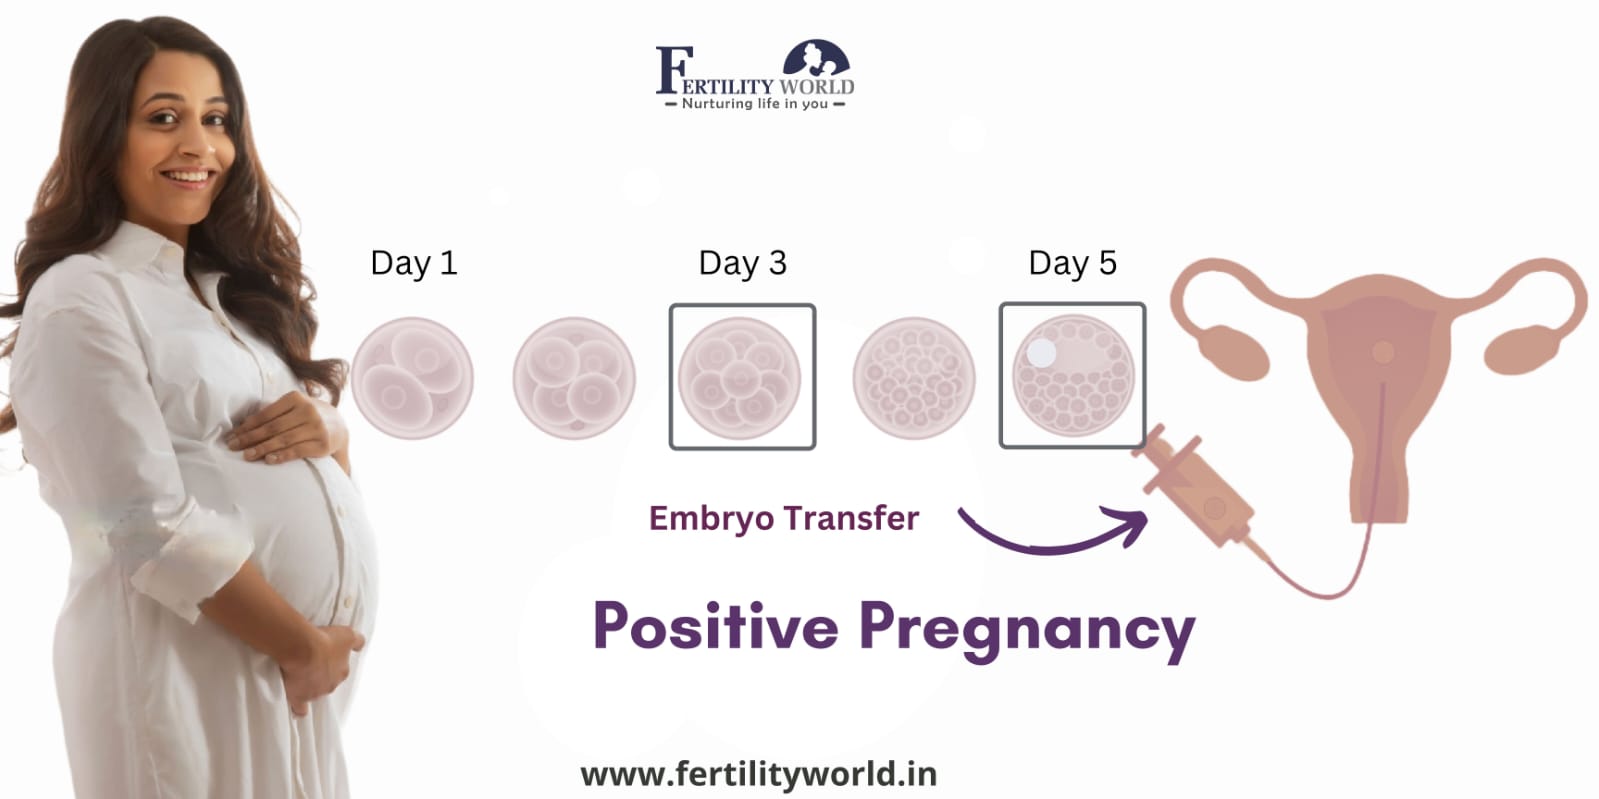 What is the IVF success rate in Pune?